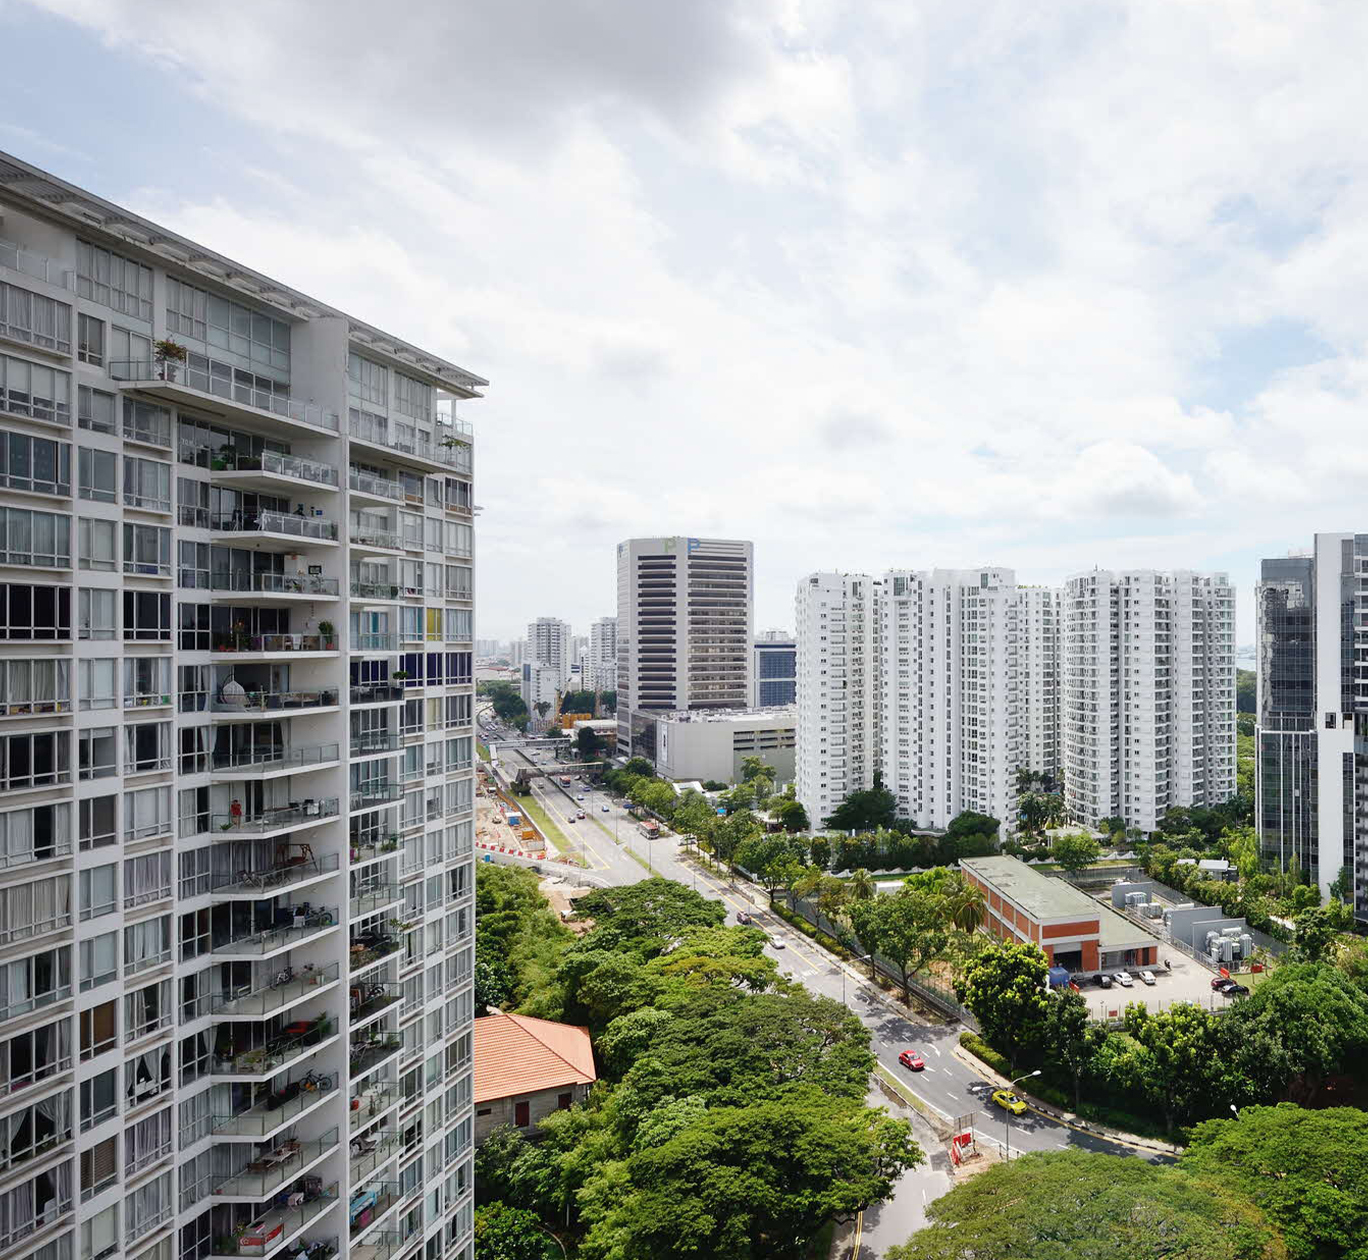 Opportunities for SG's property market